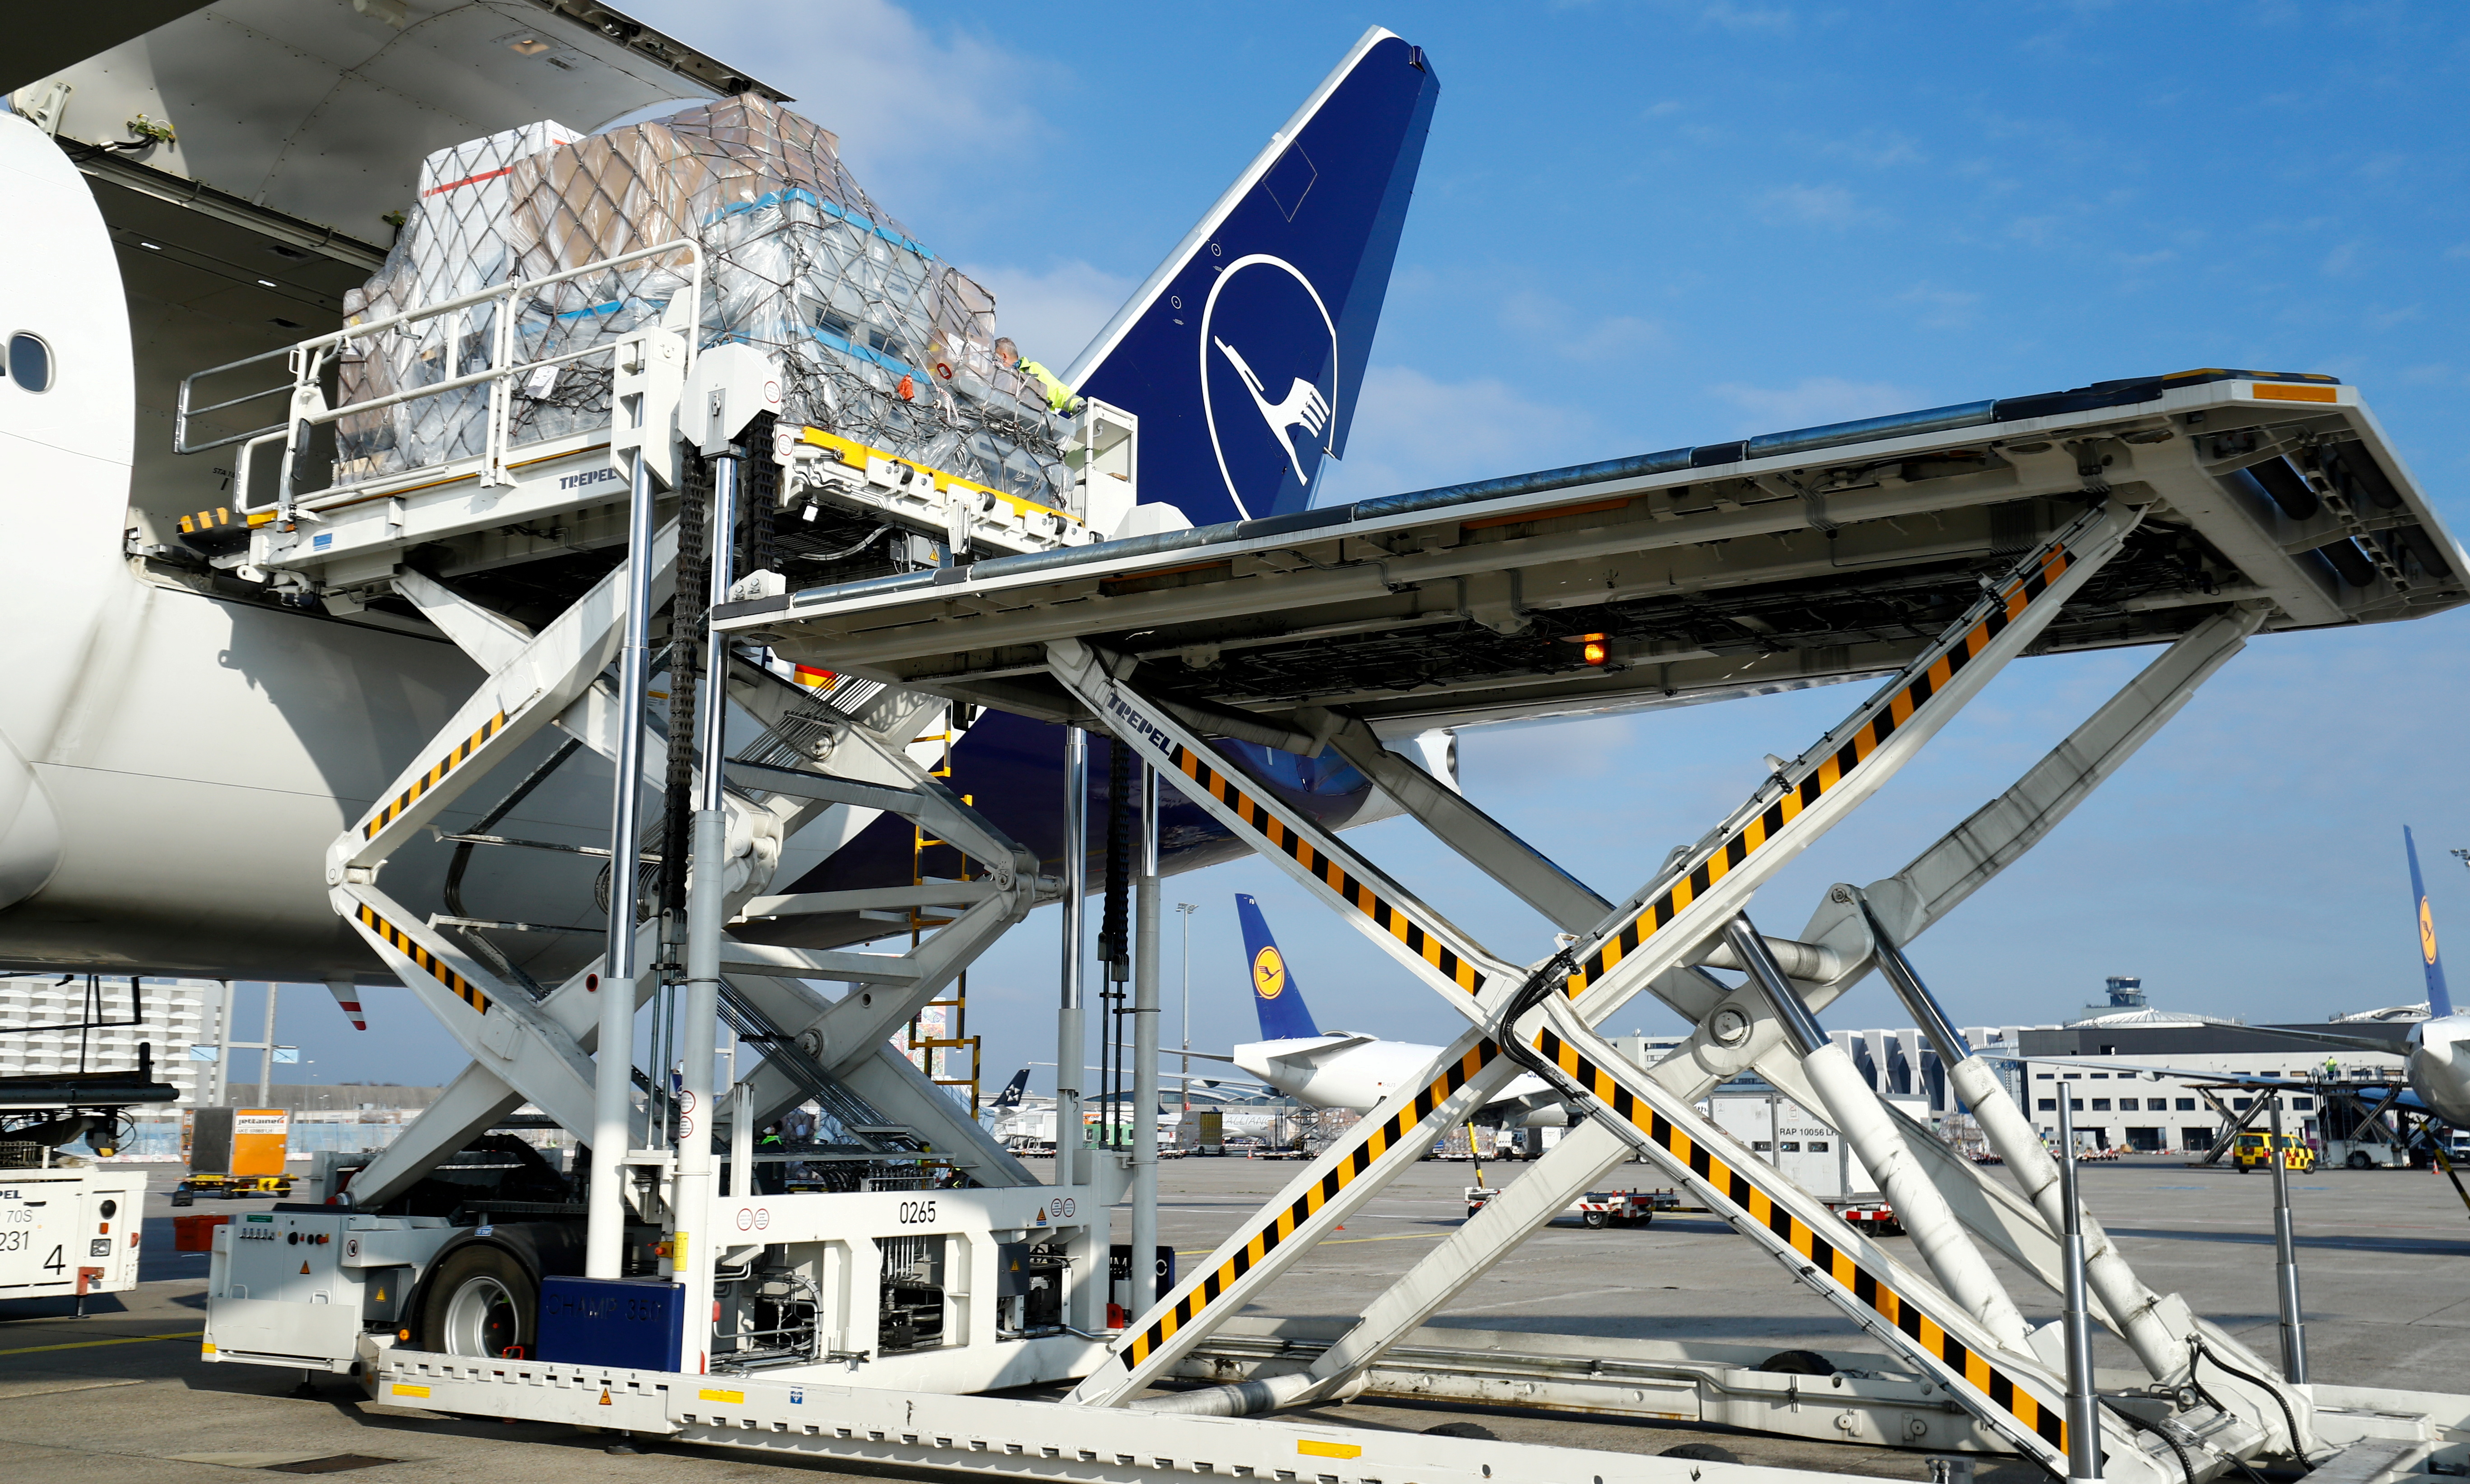 A Lufthansa CO2-neutral Boeing 777 cargo aircraft, operated with sustainable aviation fuel (SAF), is loaded at Frankfurt airport